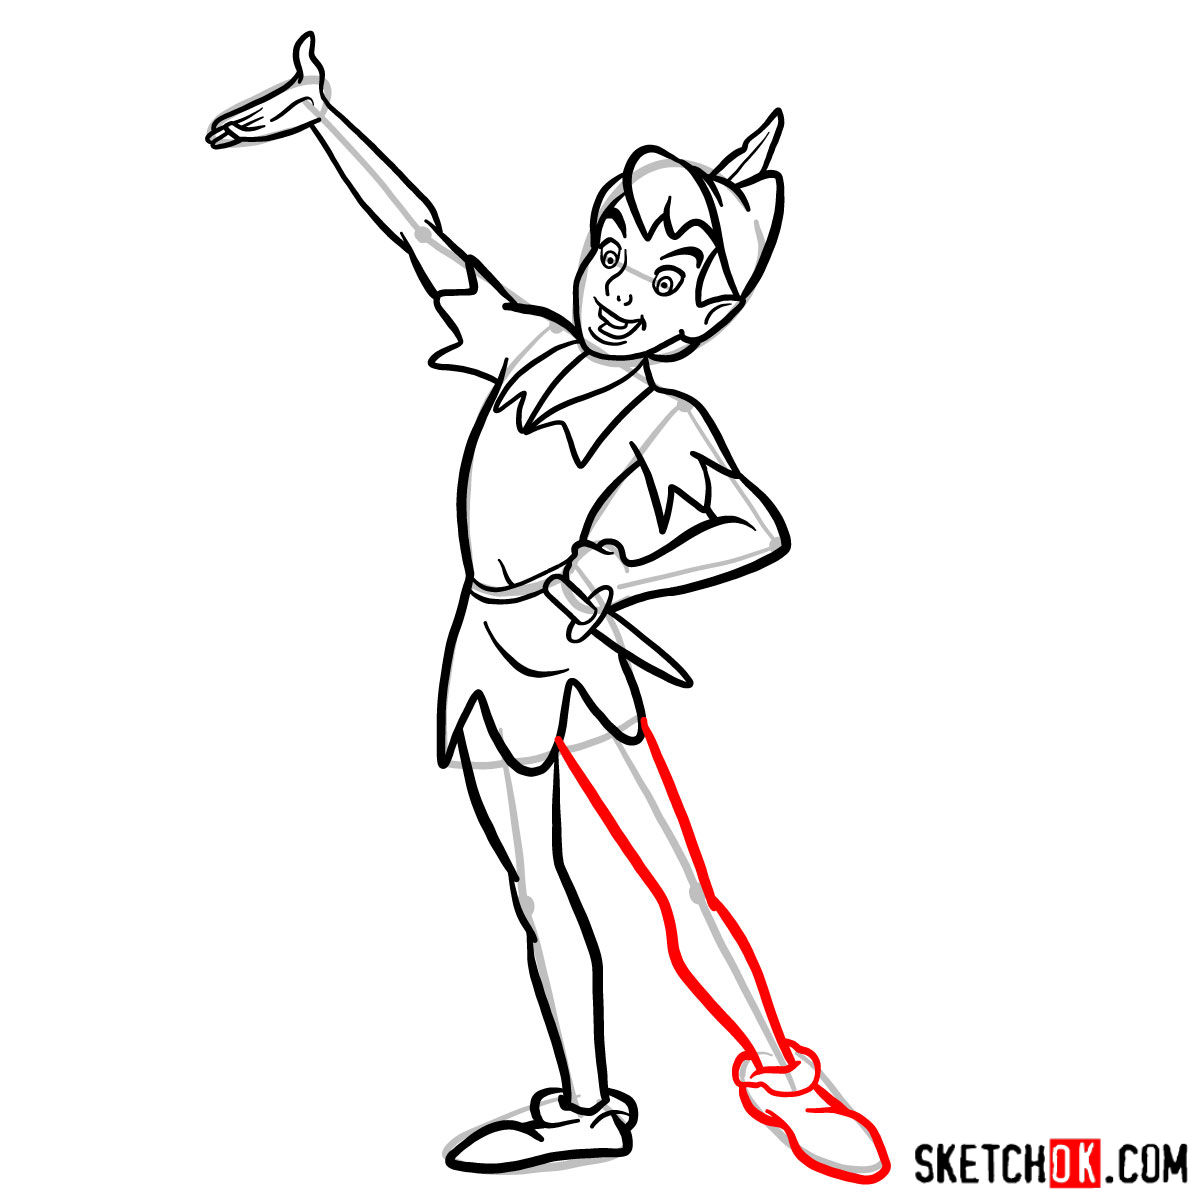 How to draw Peter Pan - step 10